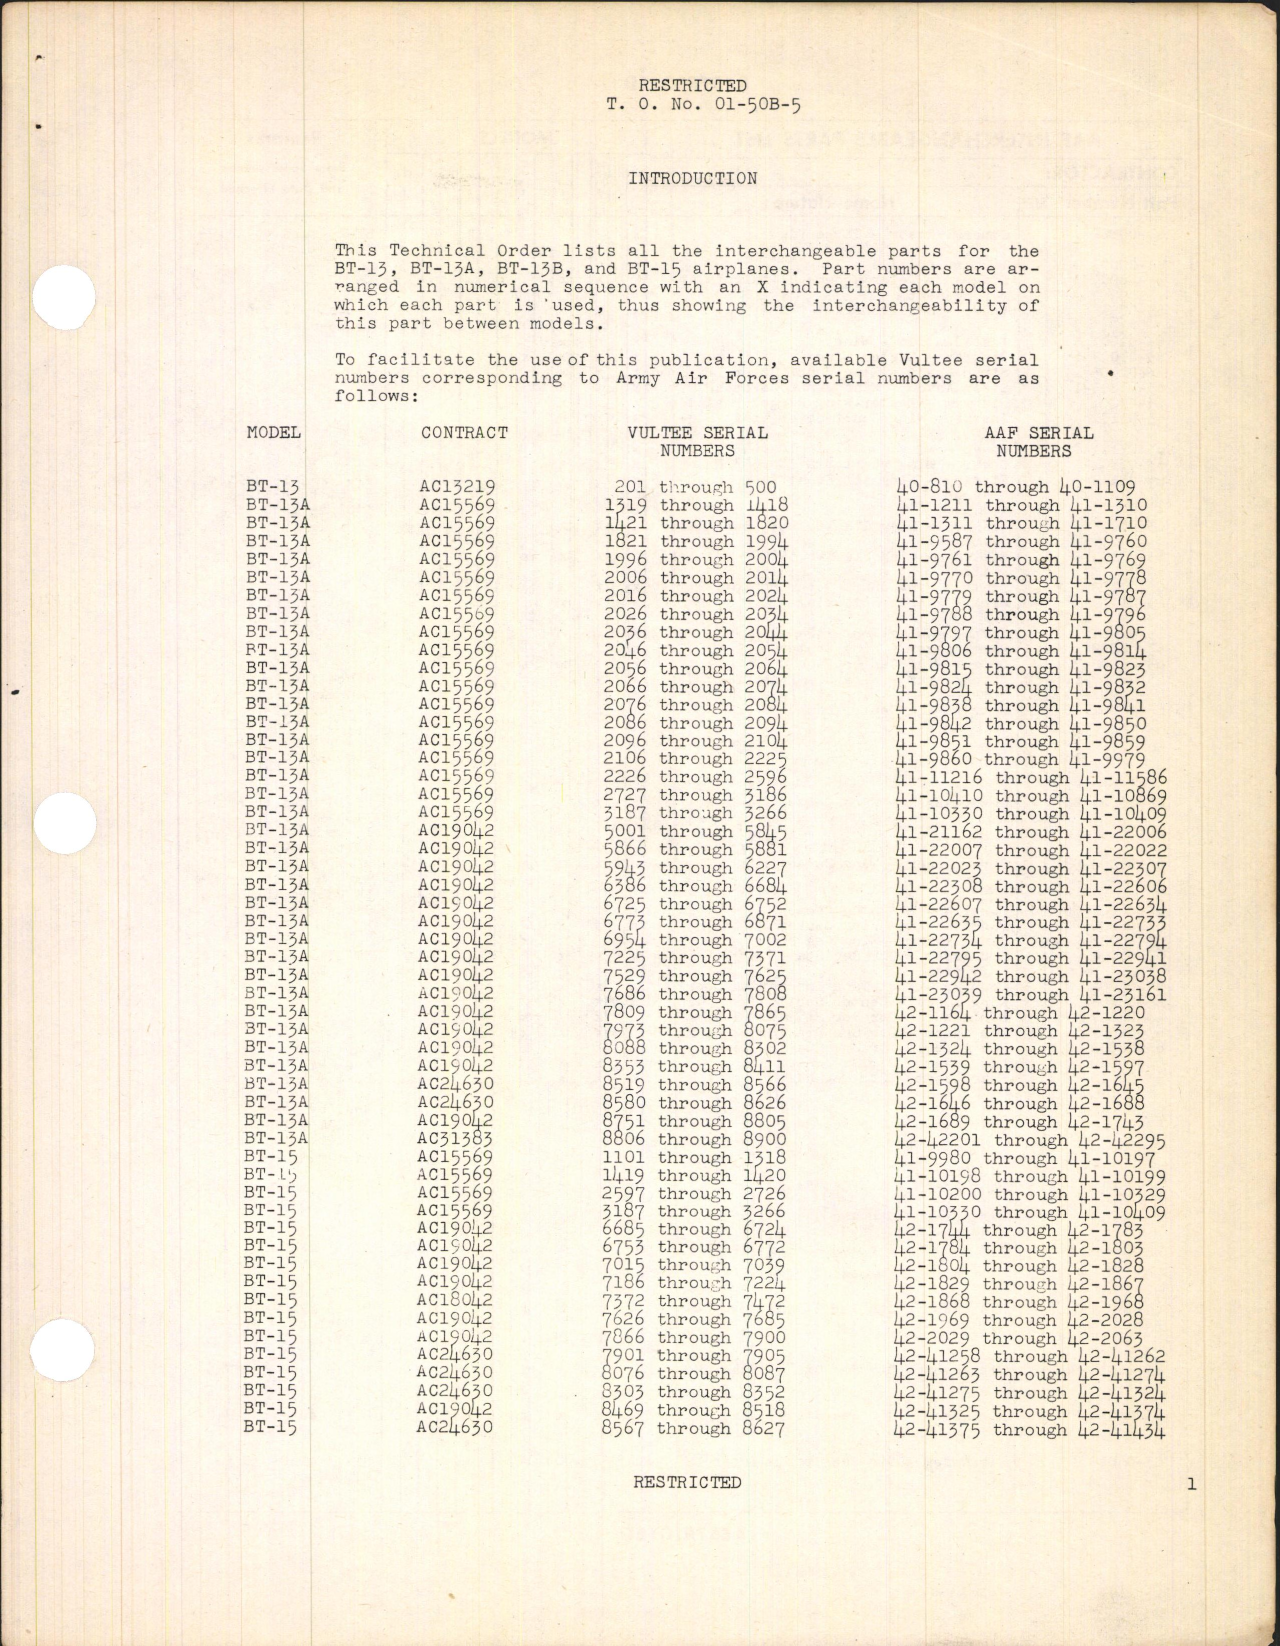 Sample page 5 from AirCorps Library document: Interchangeable Parts Catalog for BT-13, BT-13A, BT-13B, and BT-15 Airplanes